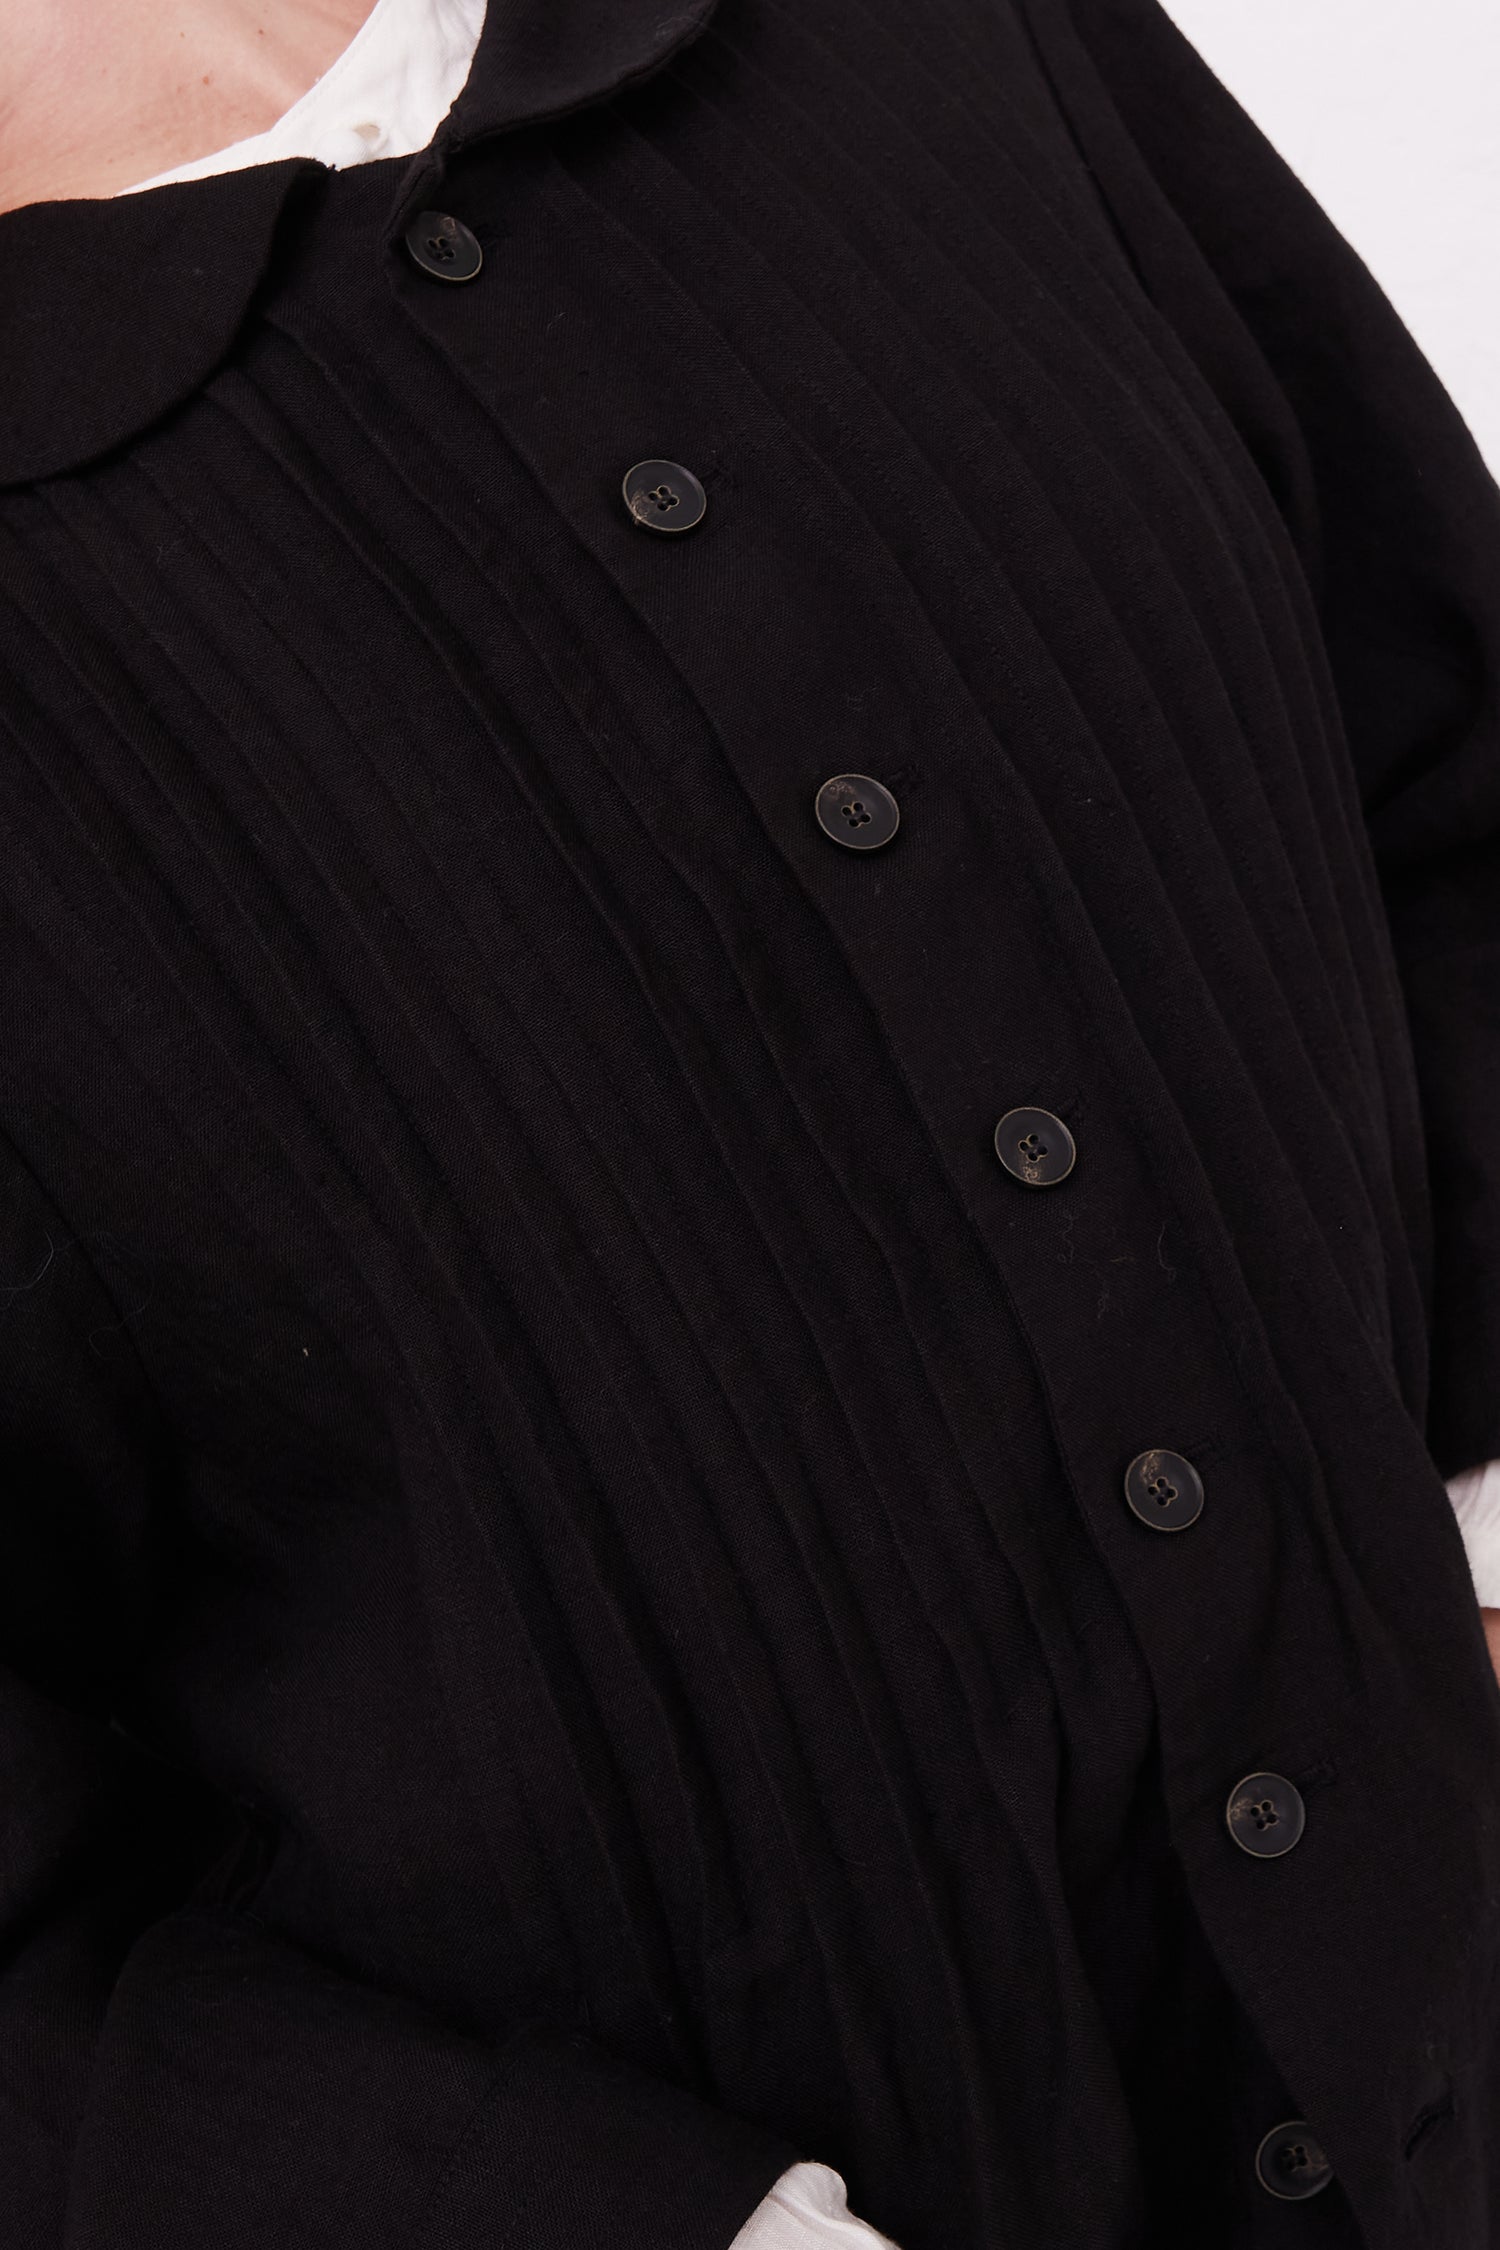 A close up of the Ichi Antiquités Kortrijk Linen Jacket in Black with oversized pockets.